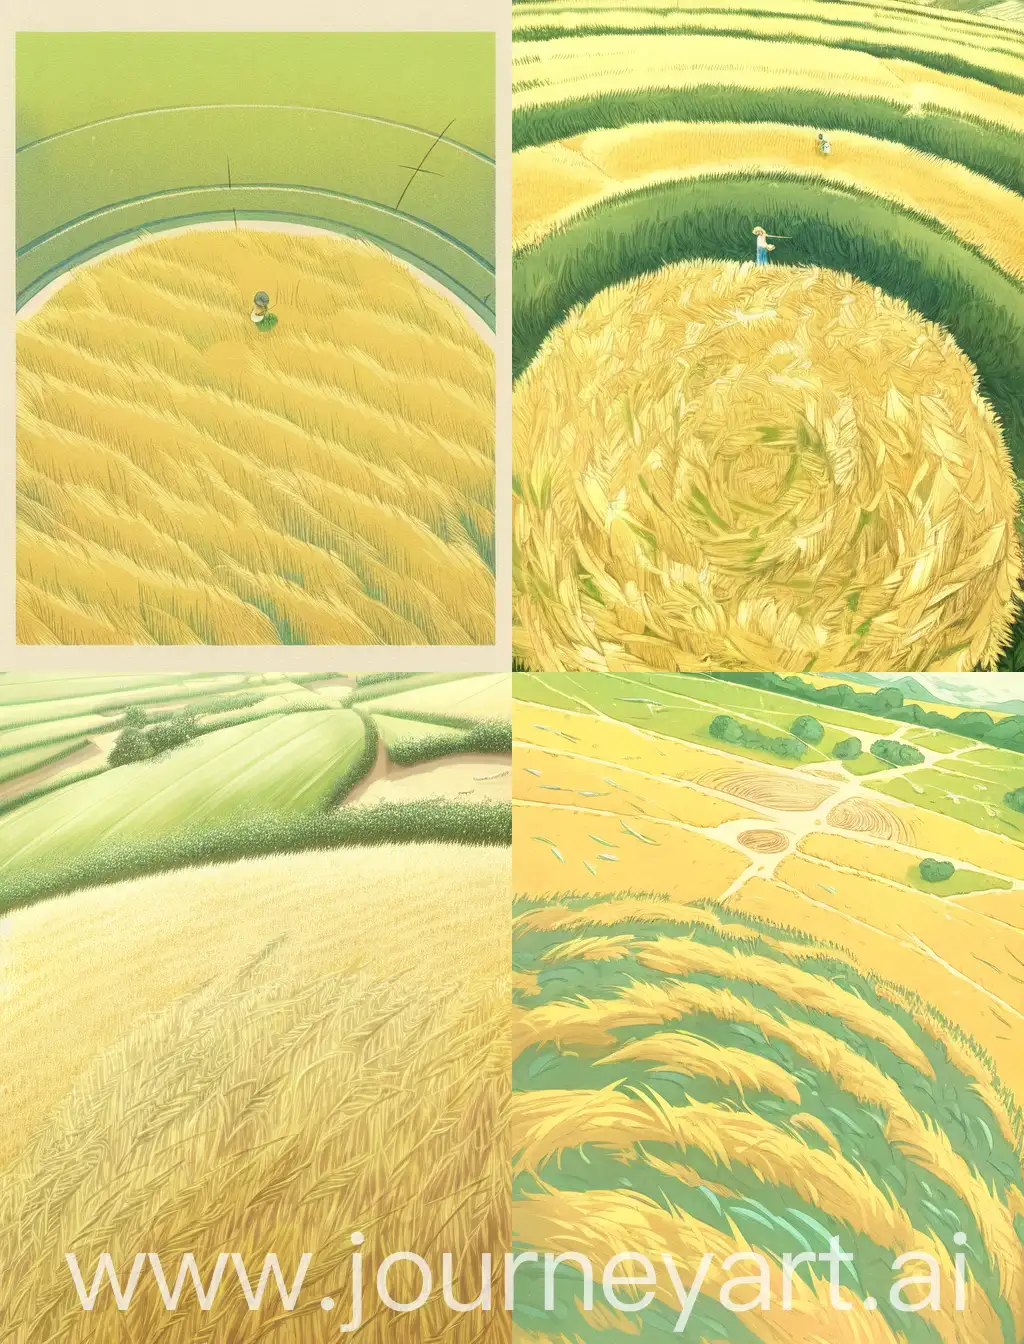 Farmers-Harvesting-in-a-Circular-Wheat-Field-HandDrawn-Top-View-Illustration-with-YellowGreen-Tones